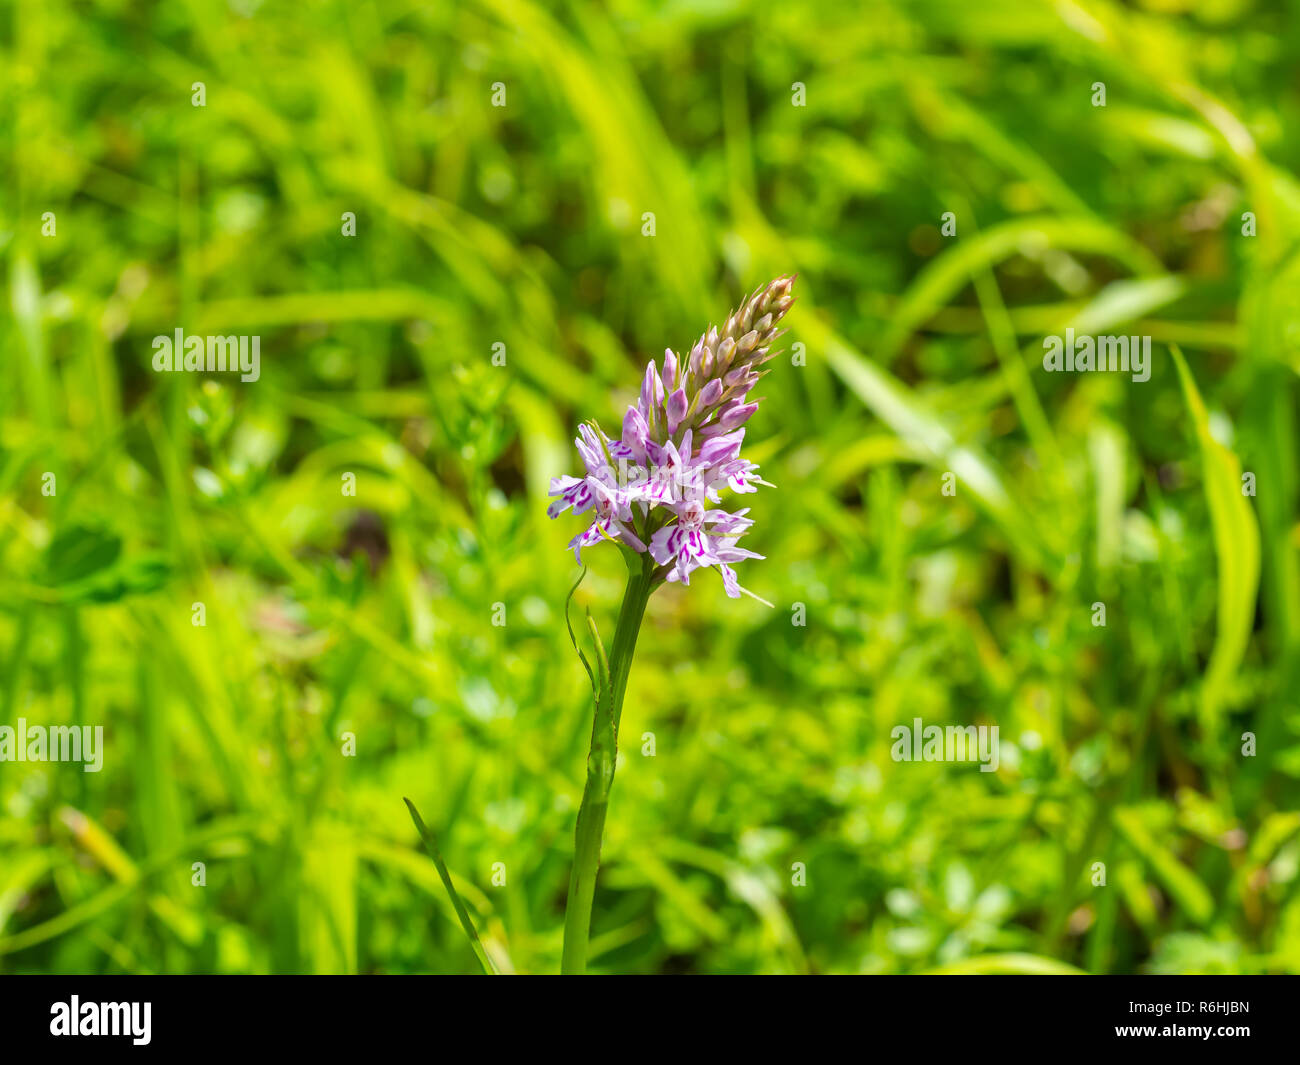 Common spotted orchid flower ( Dactylorhiza fuchsii ) Stock Photo